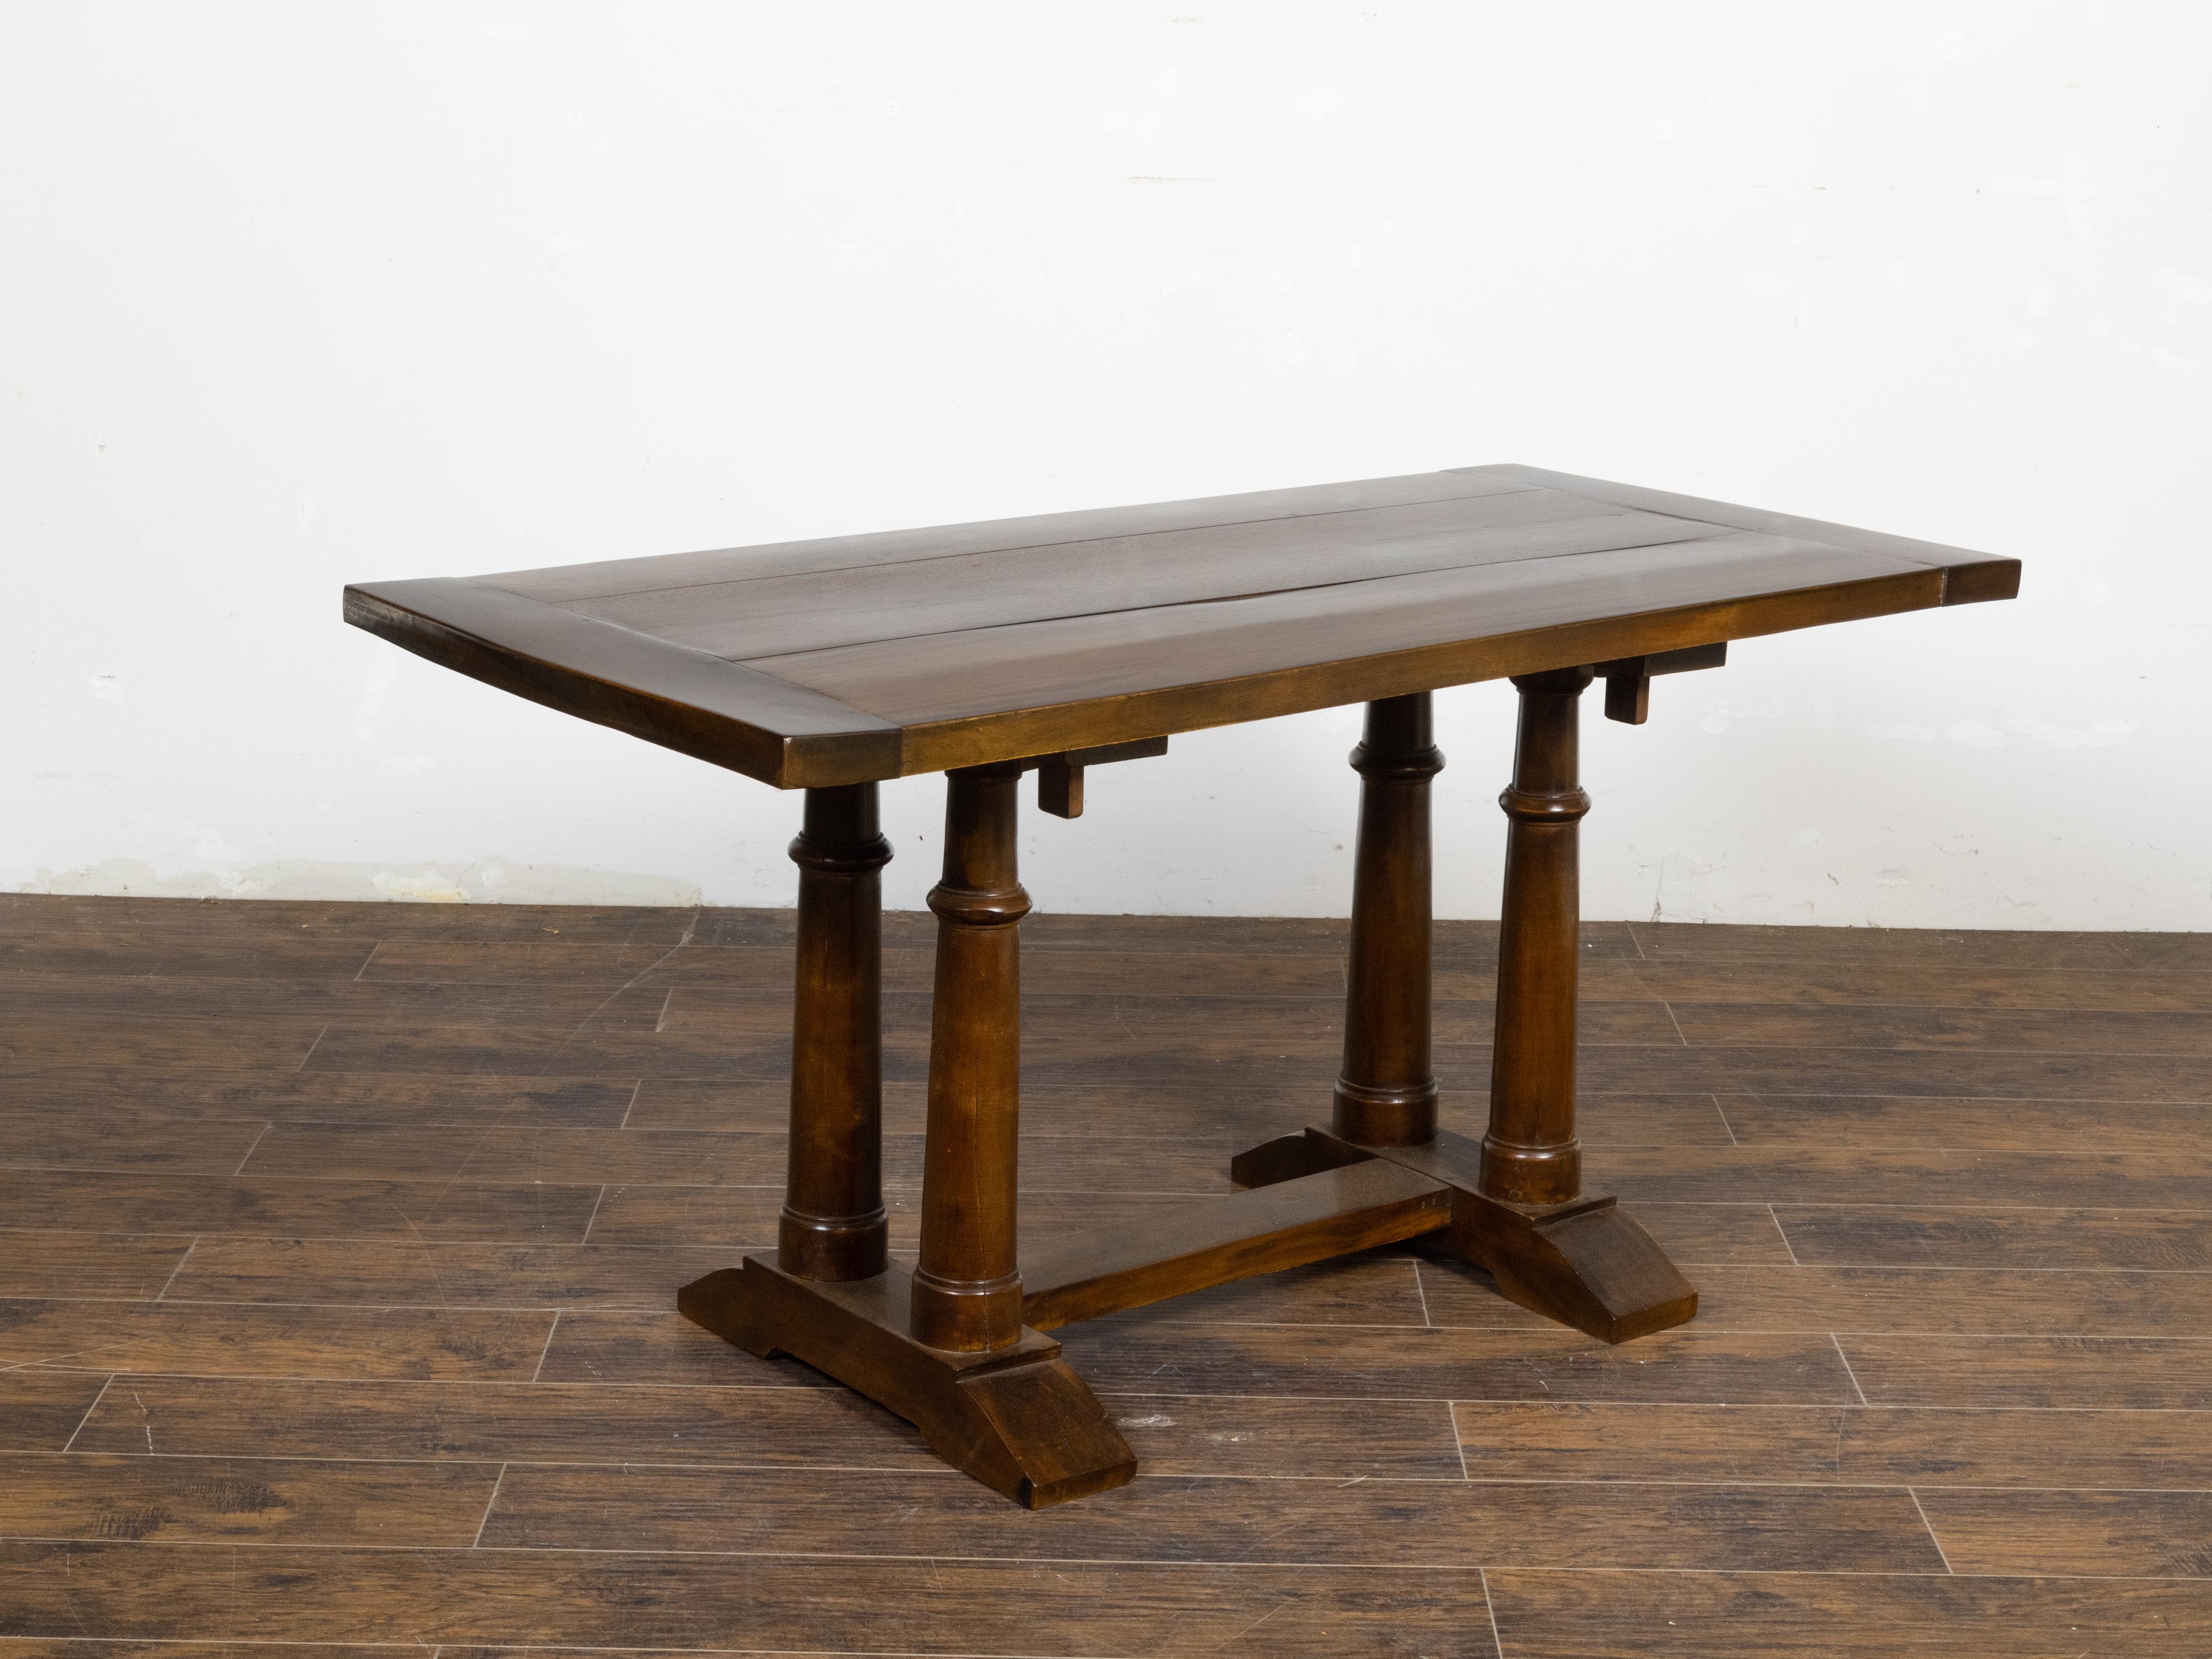 An Italian walnut trestle table from the 19th century, with column shaped legs. Created in Italy during the 19th century, this walnut table features a rectangular planked top with darker boards on the sides, sitting above a trestle base. Four